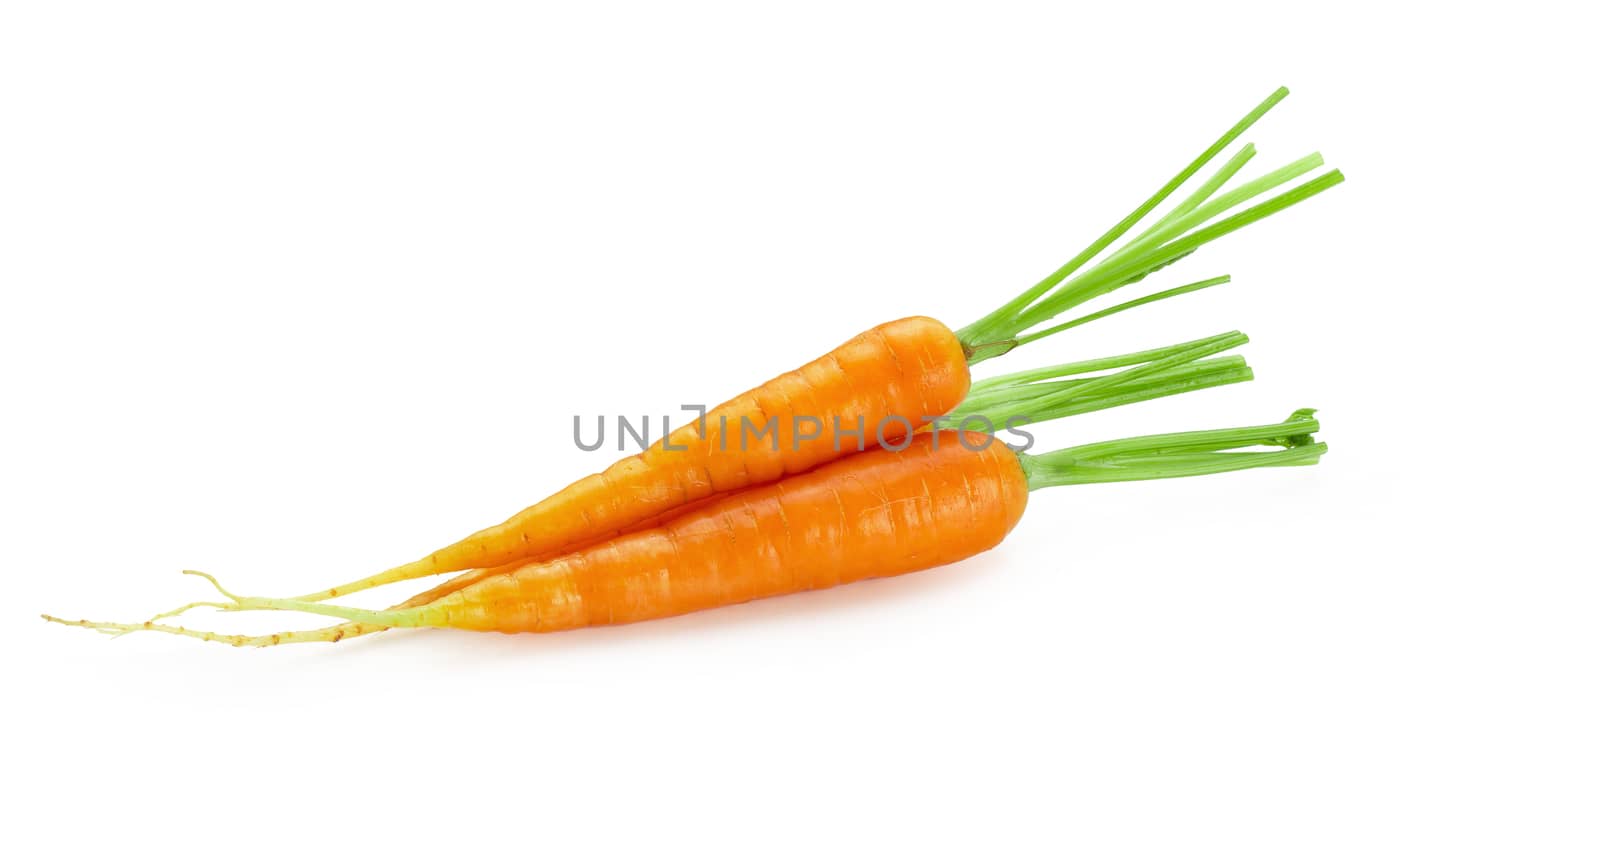 Bunch of baby carrots vegetable isolated over white background. by kaiskynet